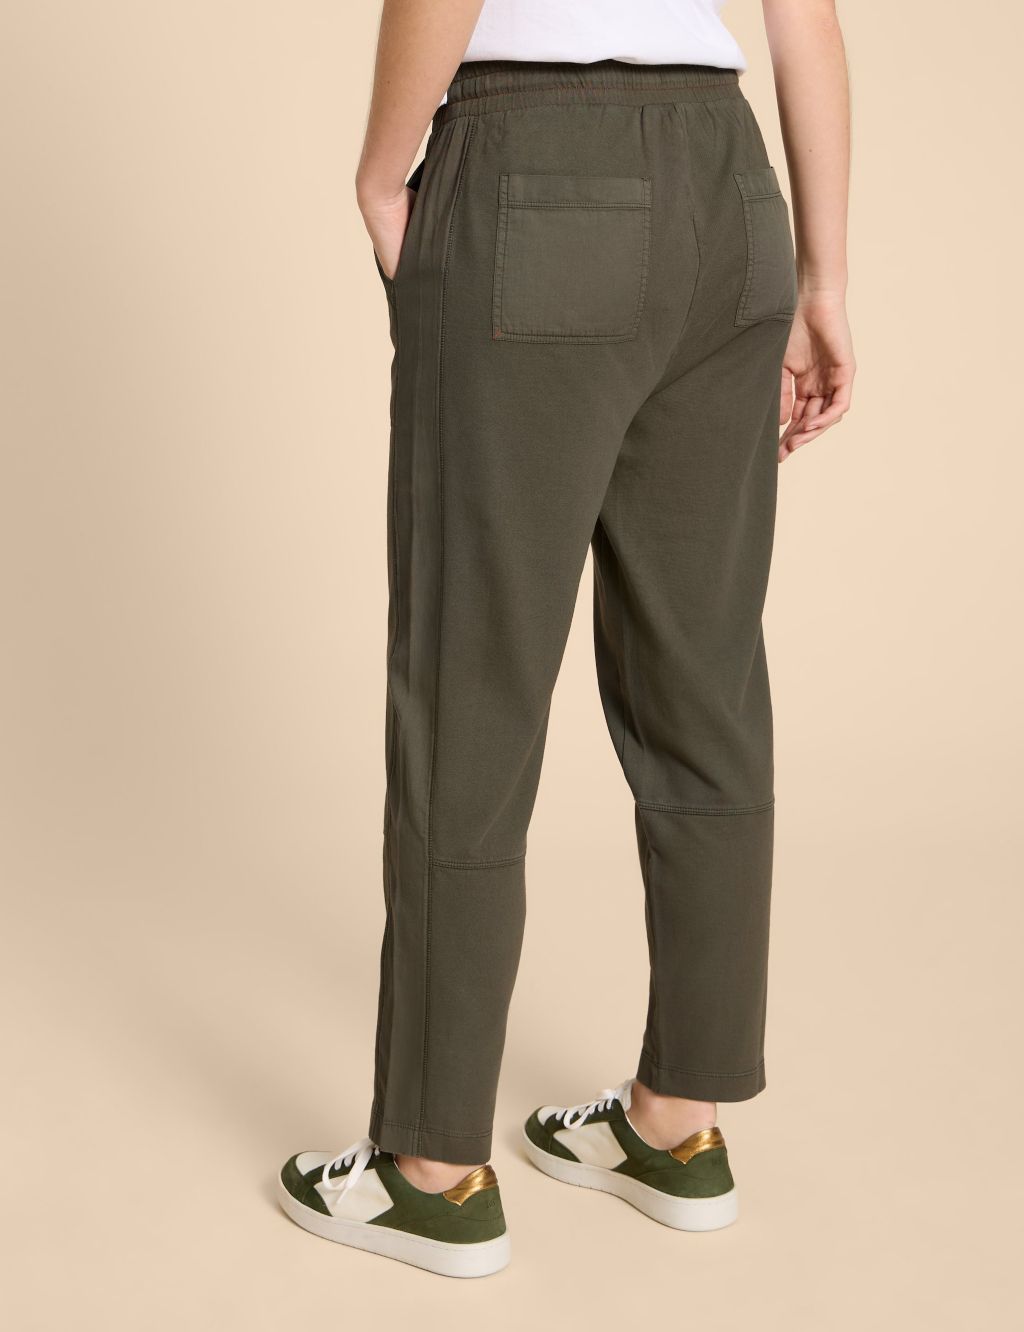 Jersey Slim Fit Joggers image 4